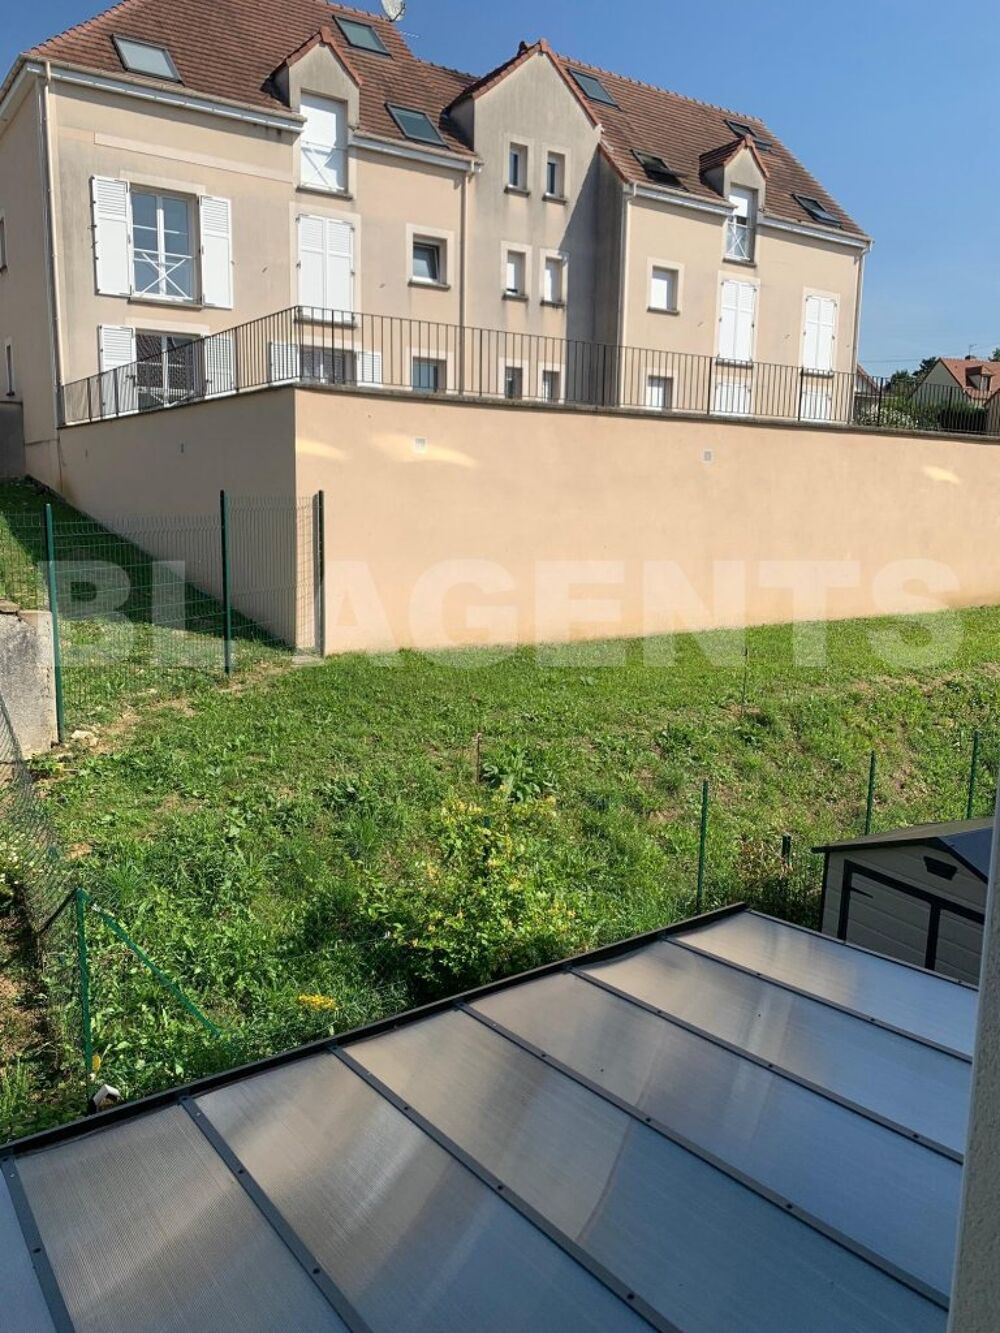 Vente Appartement Appartement 2 pice(s) 40 m2 Chateau-thierry